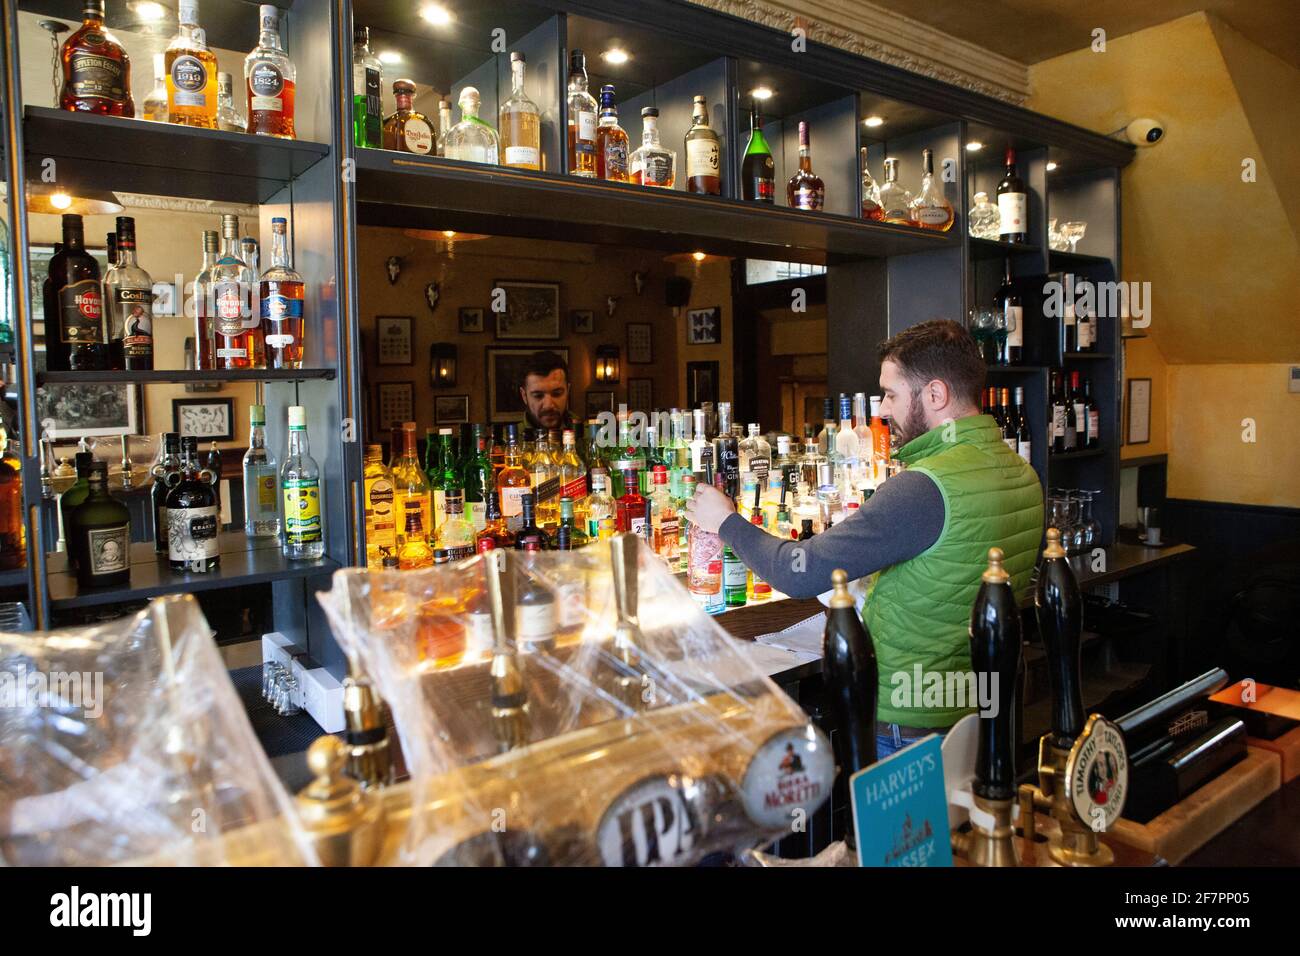 London, UK, 9 April 2021: The Abbeville pub, in Clapham, gets ready for re-opening for outdoor drinks and dining on their terrace from 12th April. While the beer taps are kept clean under plastic wrapping, barman Klodian dusts bottles of spirits. Anna Watson/Alamy Live News Stock Photo